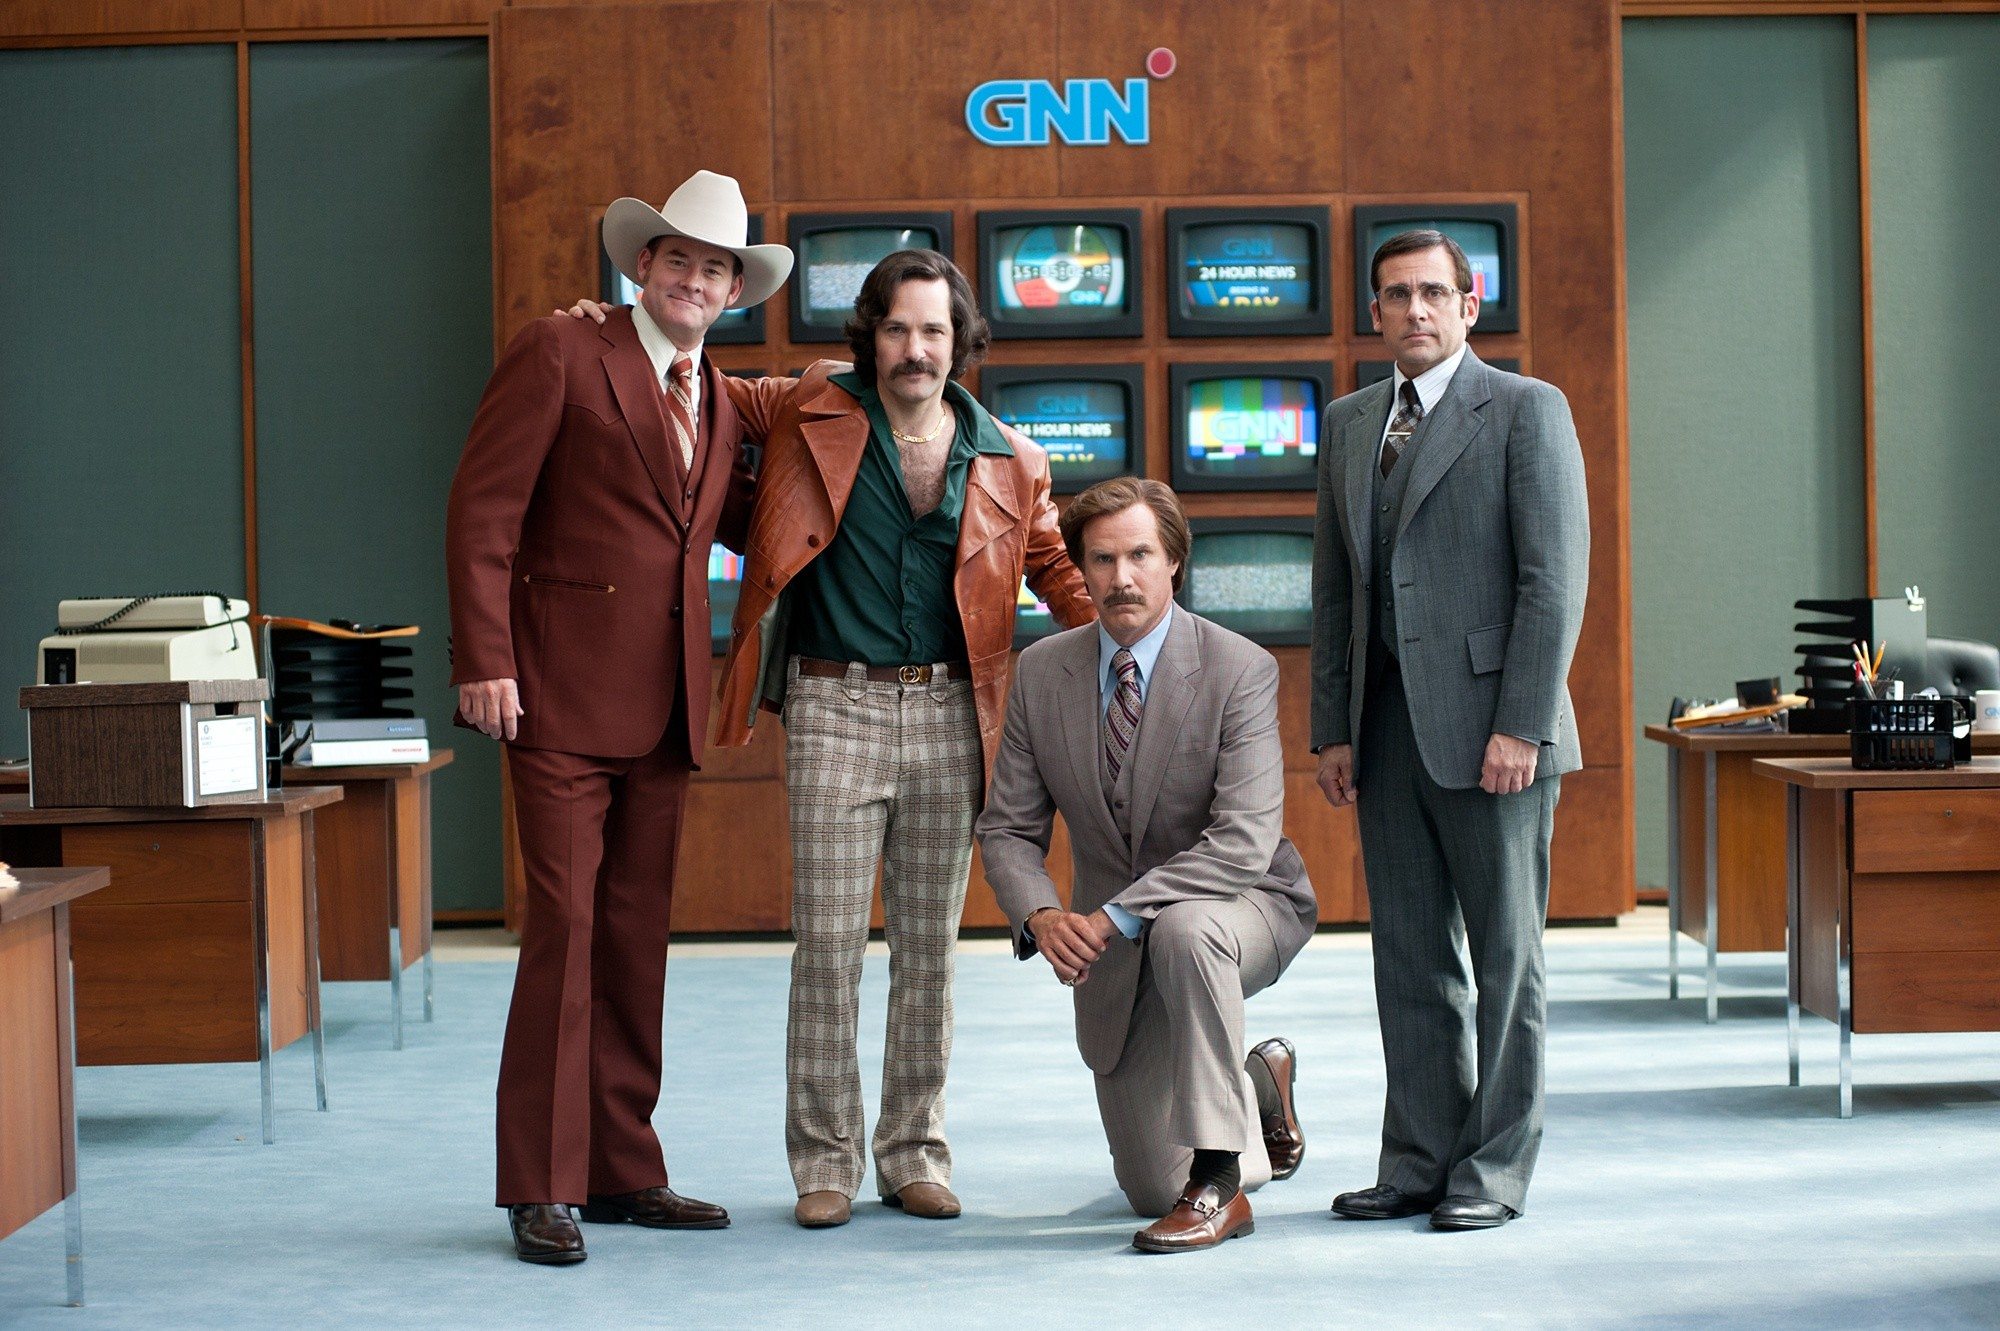 David Koechner, Paul Rudd, Will Ferrell and Steve Carell in Paramount Pictures' Anchorman: The Legend Continues (2013)